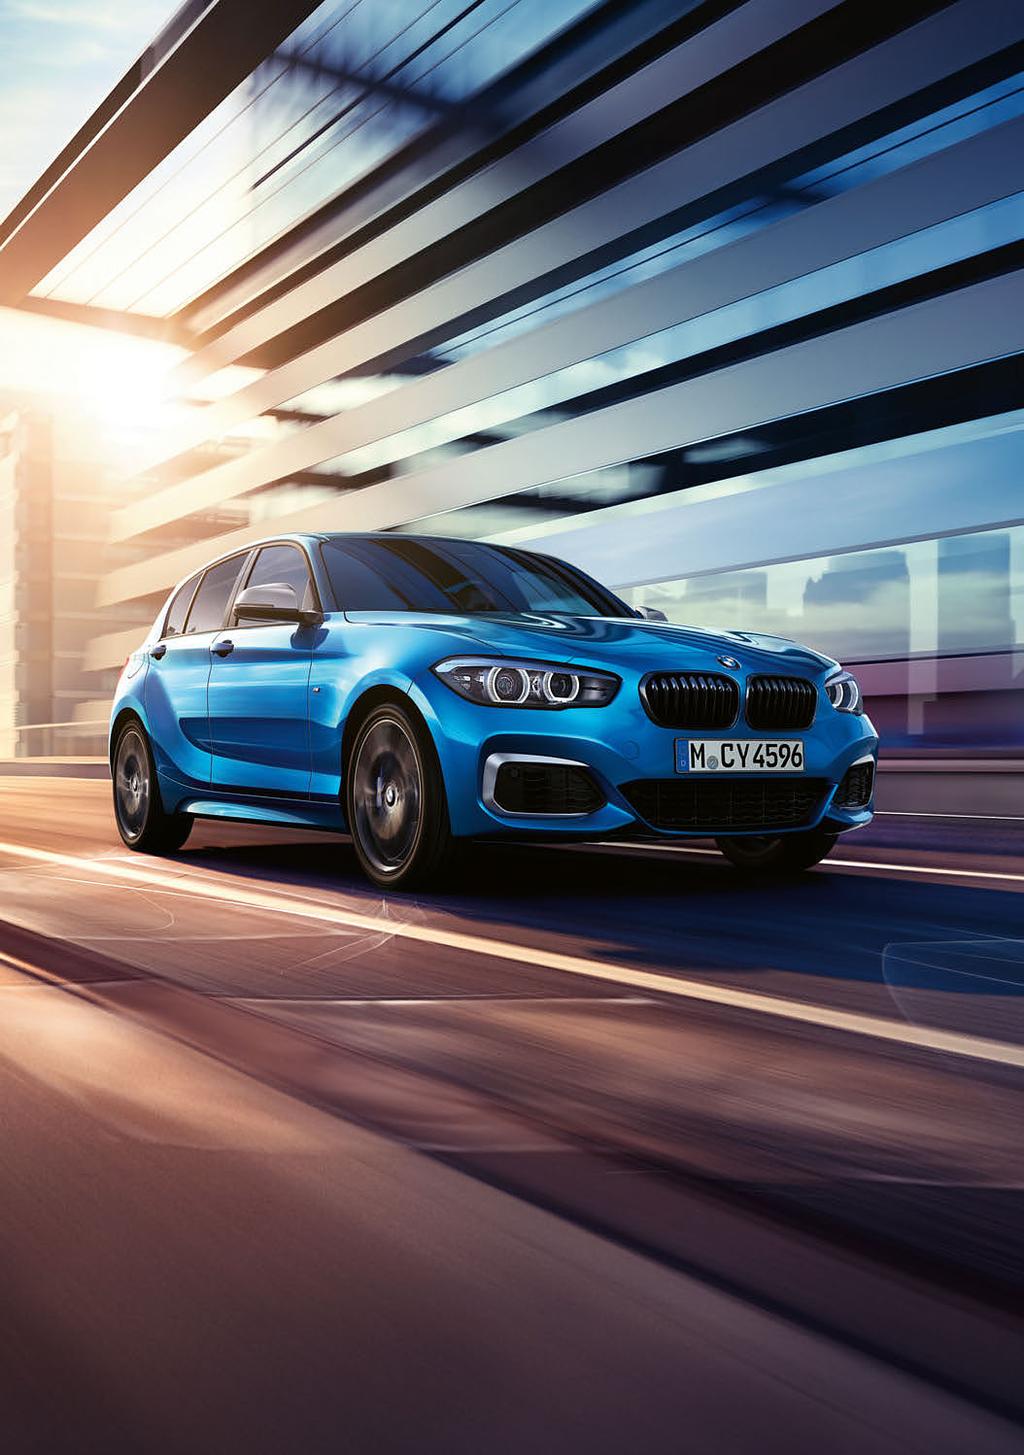 The Ultimate Driving Machine THE NEW BMW 1 SERIES 3-DOOR AND